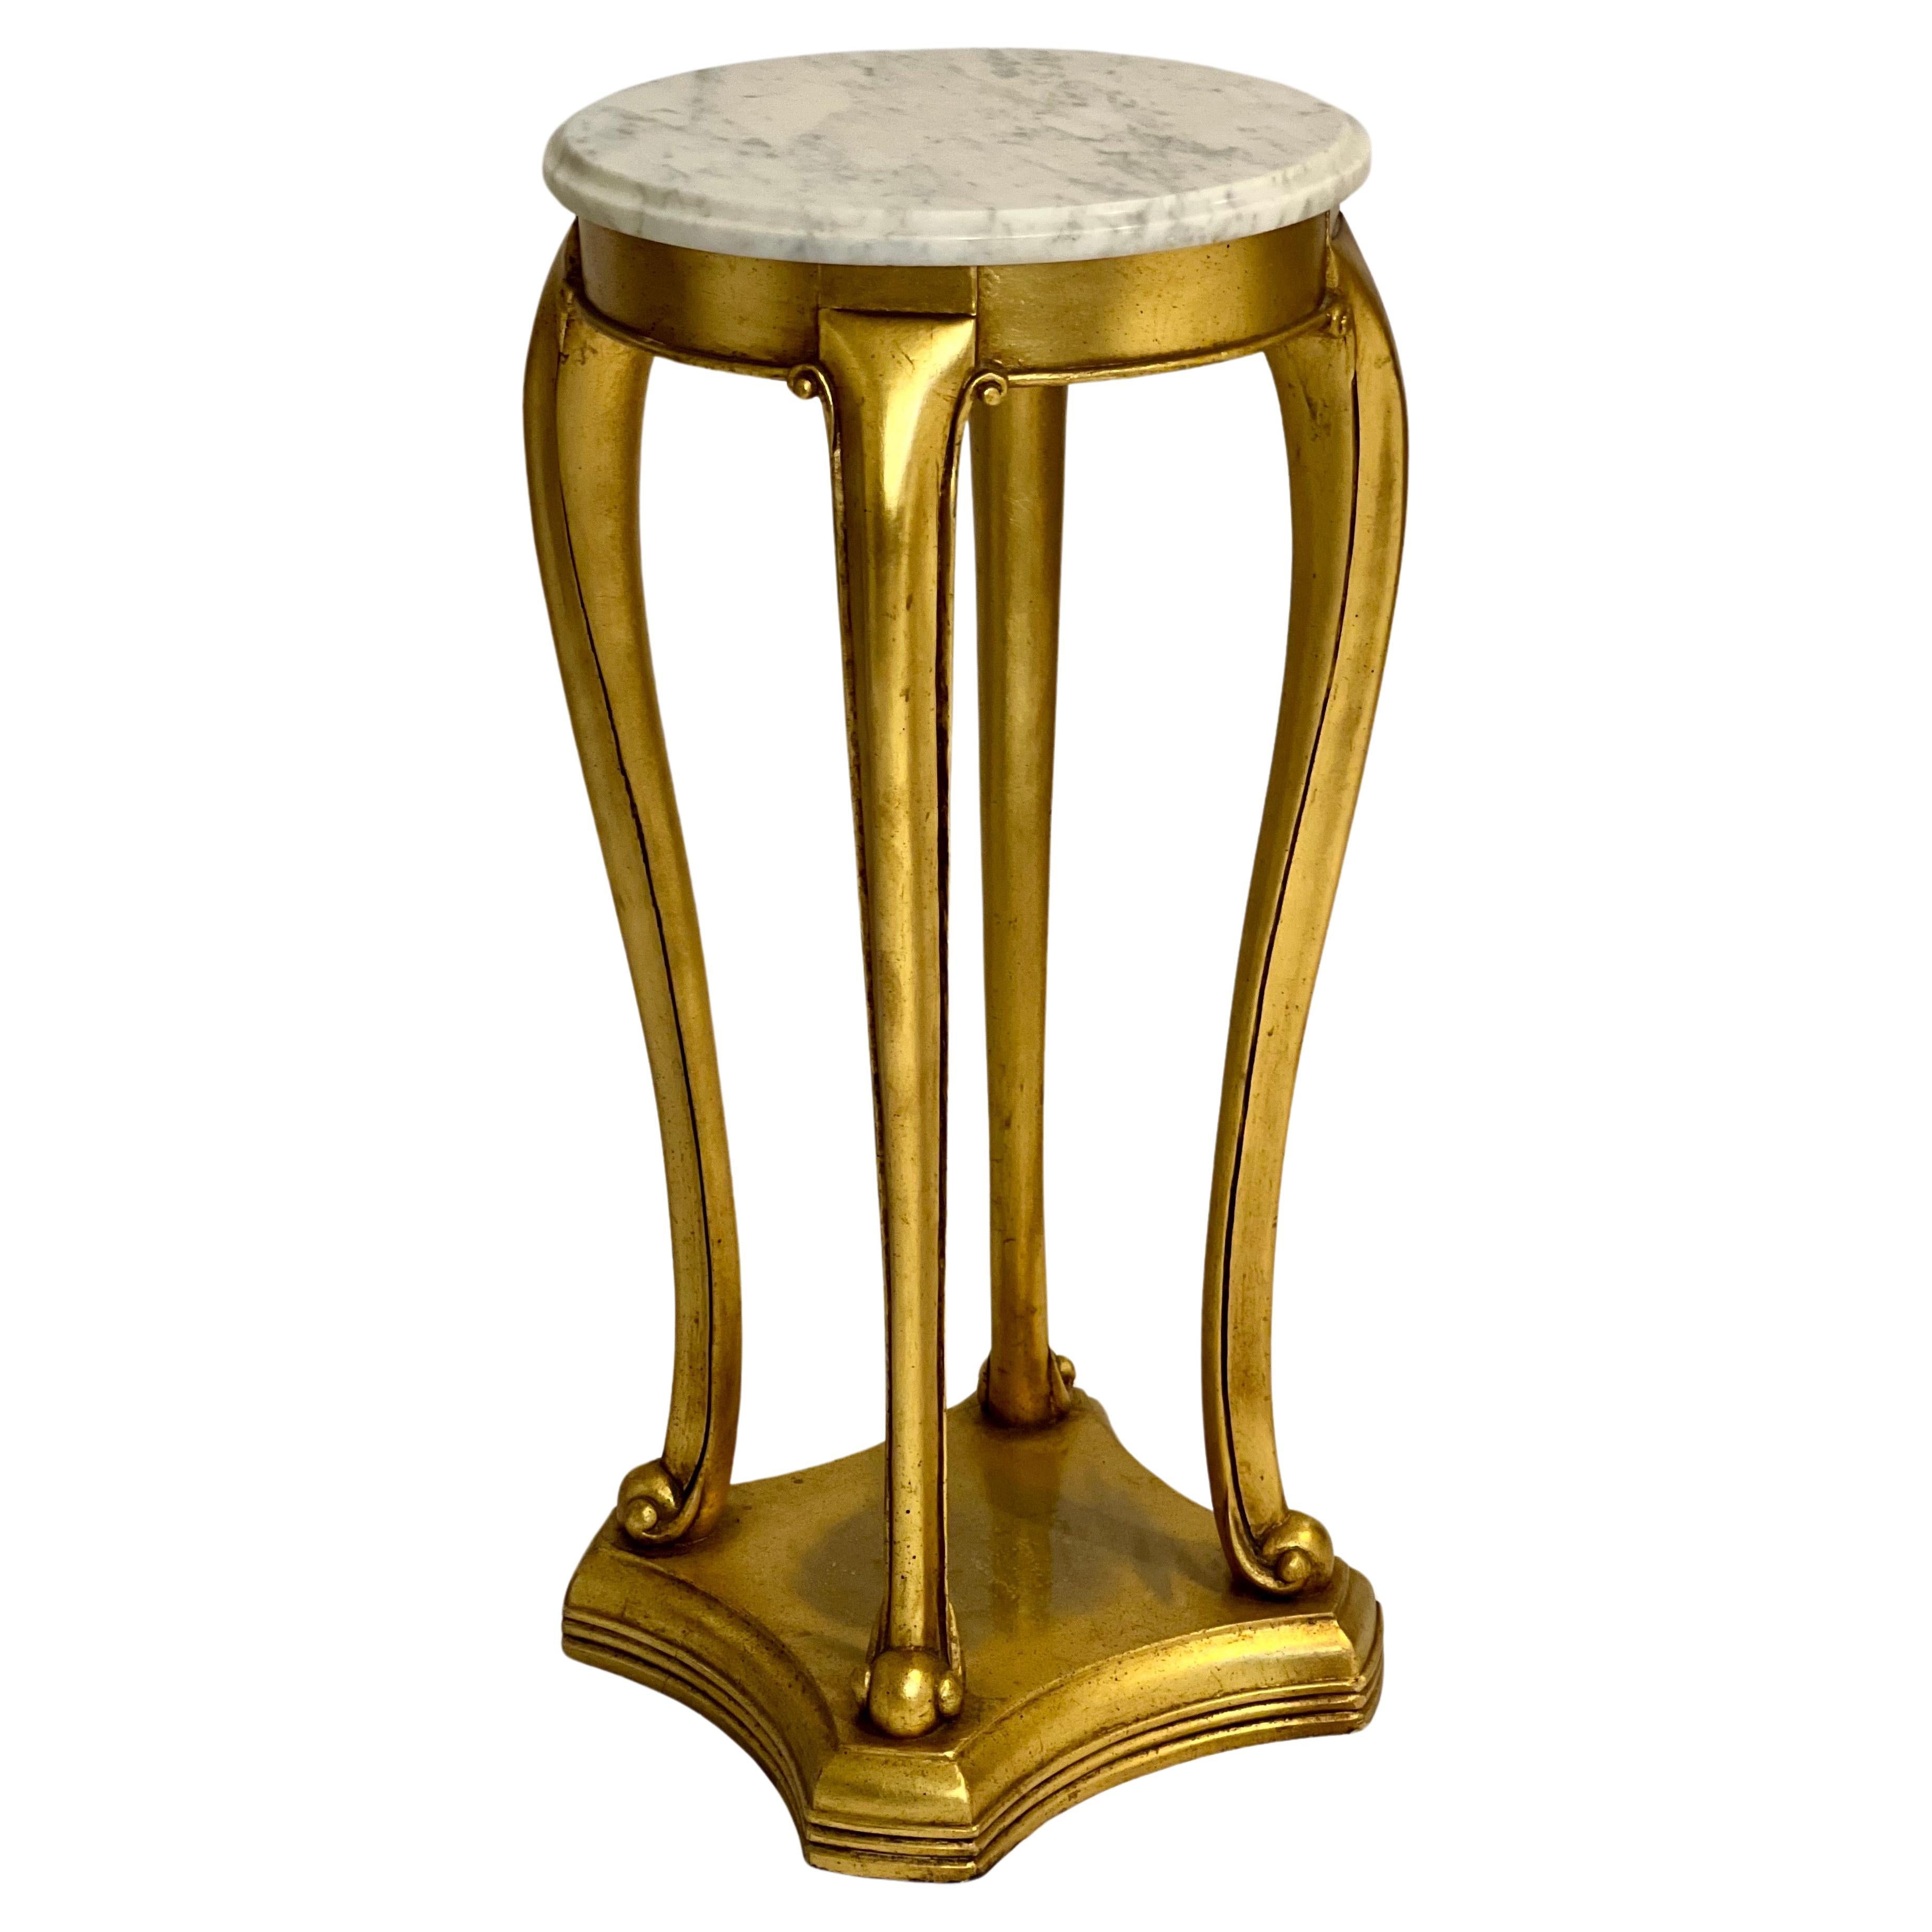 19th Century Regency Style Gilt Wood Marble Top Pedestal or Plant Stand For Sale